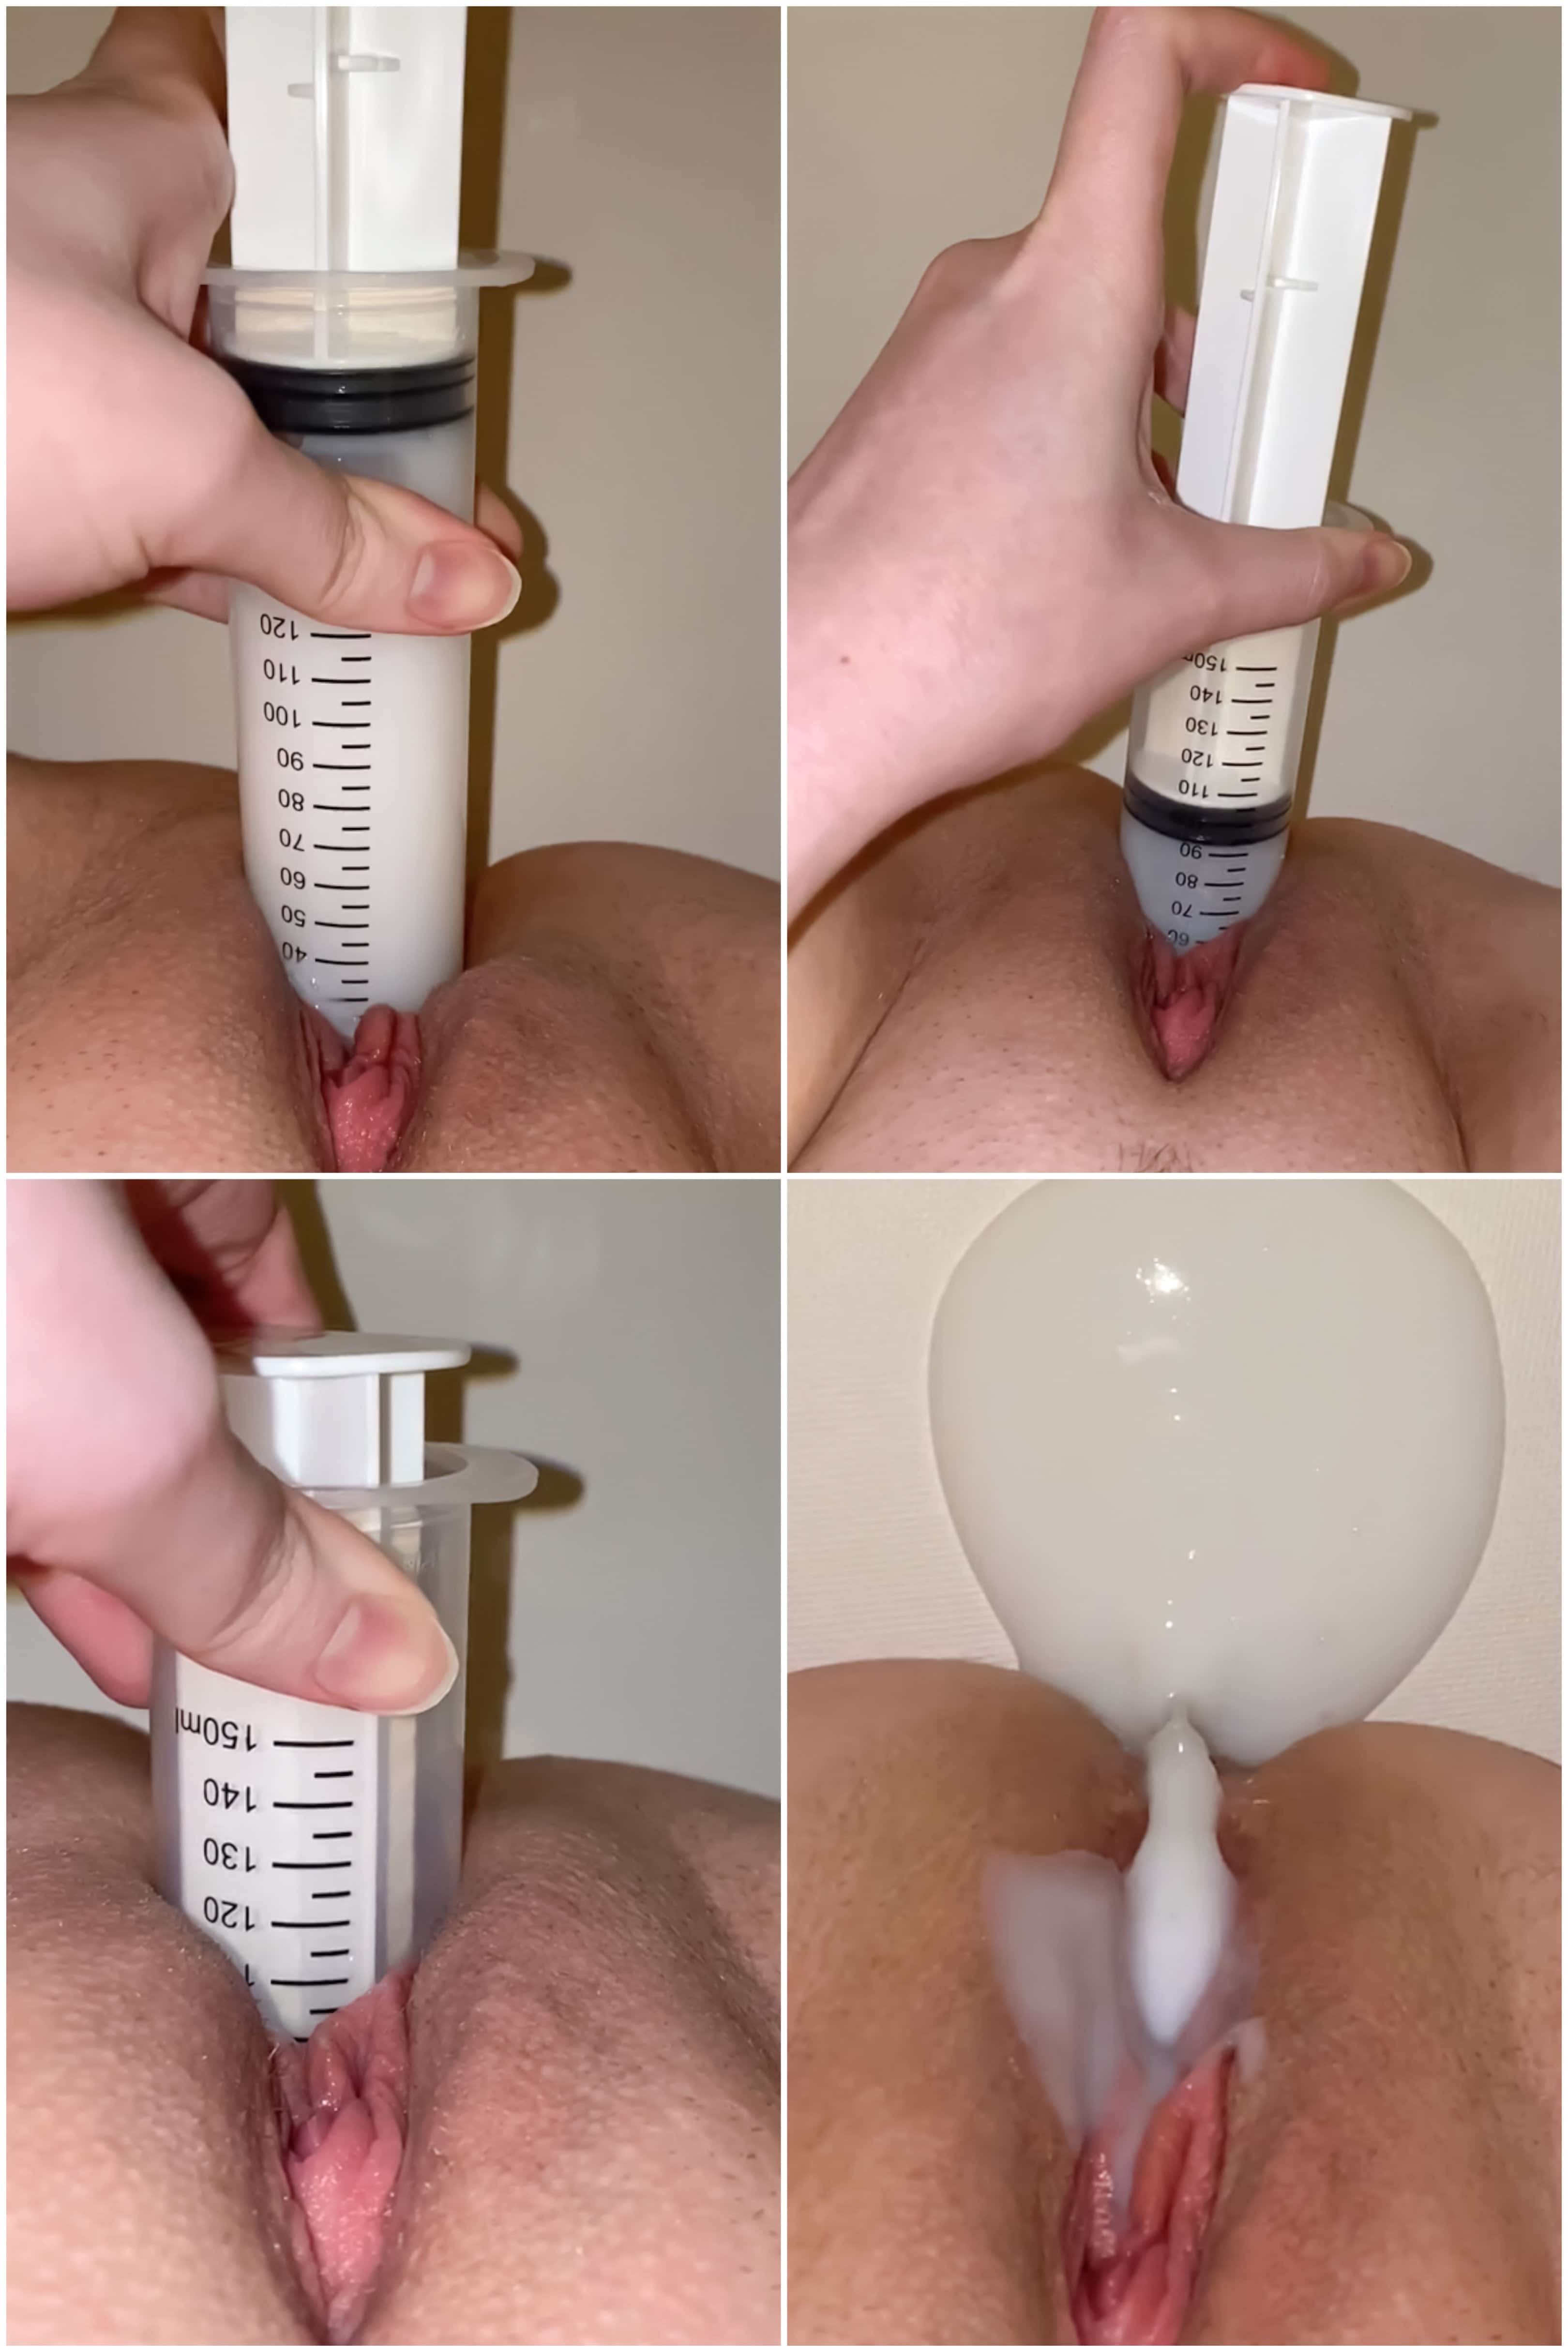 Artificial insemination with sperm as lubricant Sperm ice cubes picture